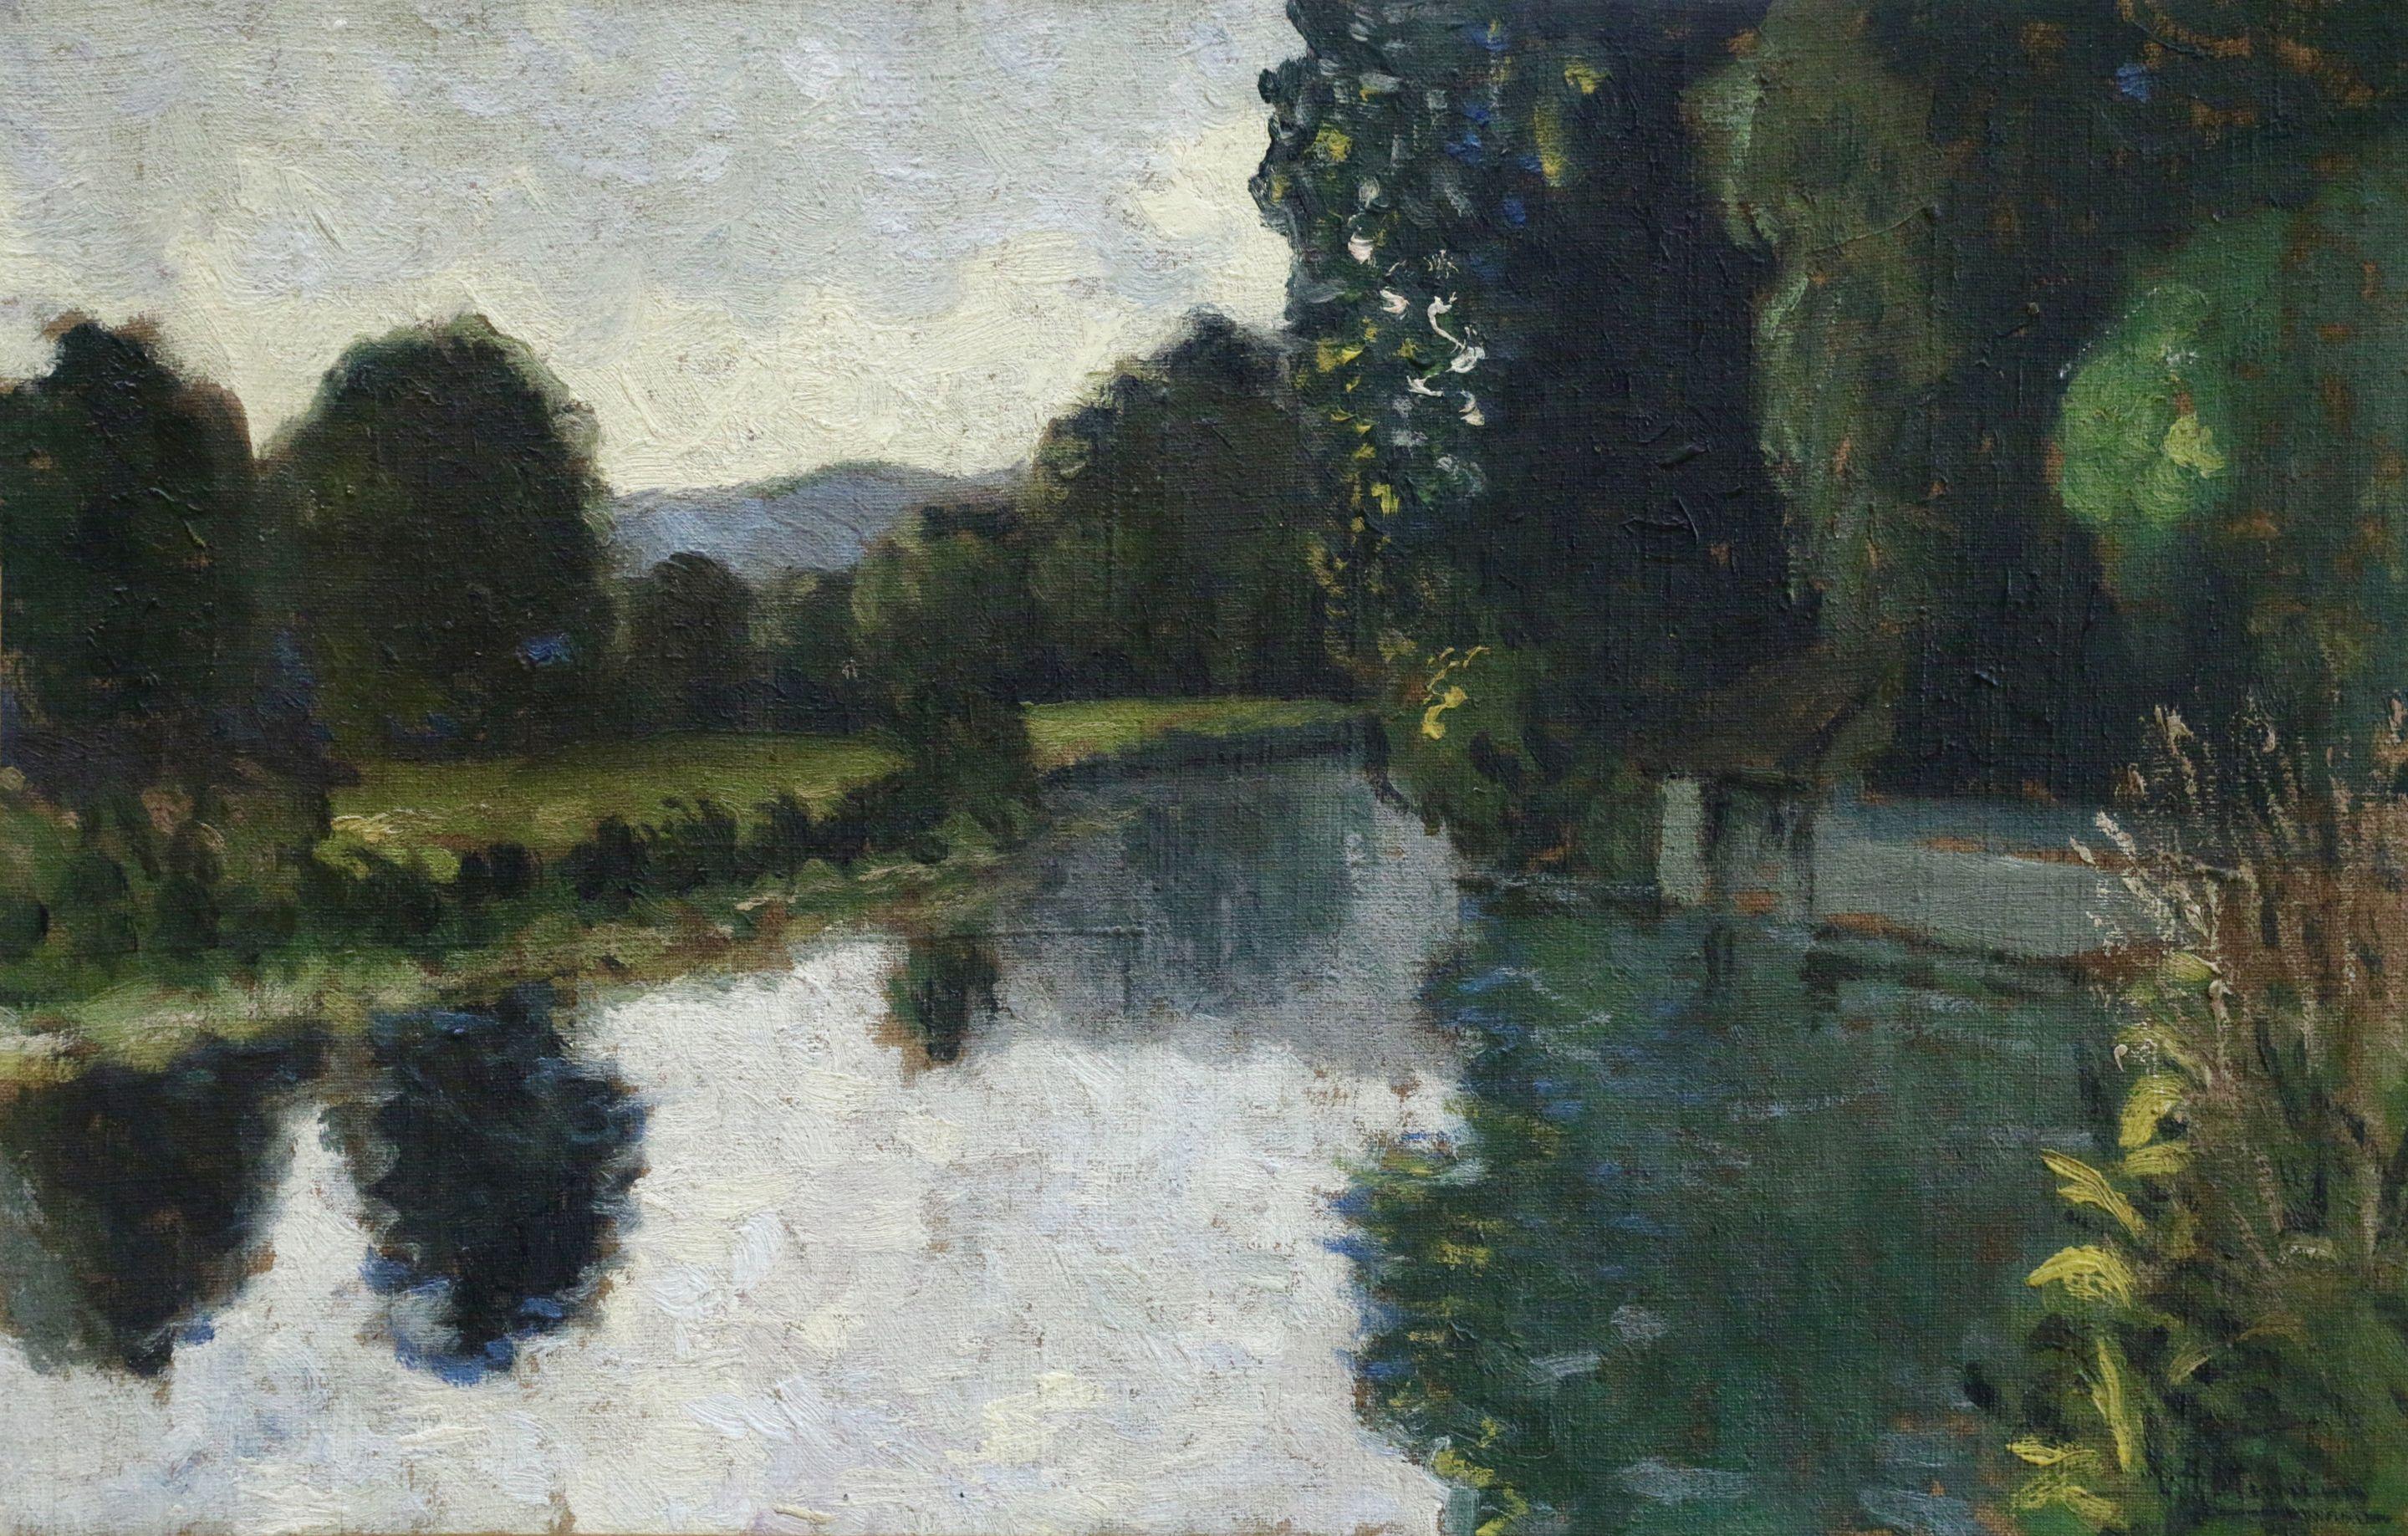 Oil on canvas circa 1910. Signed lower right. This painting is not currently framed but a suitable frame can be sourced if required.

After studying in Odessa, Aleksandr Altmann arrived in Vienna in 1903, then Paris in 1909 where he was admitted to